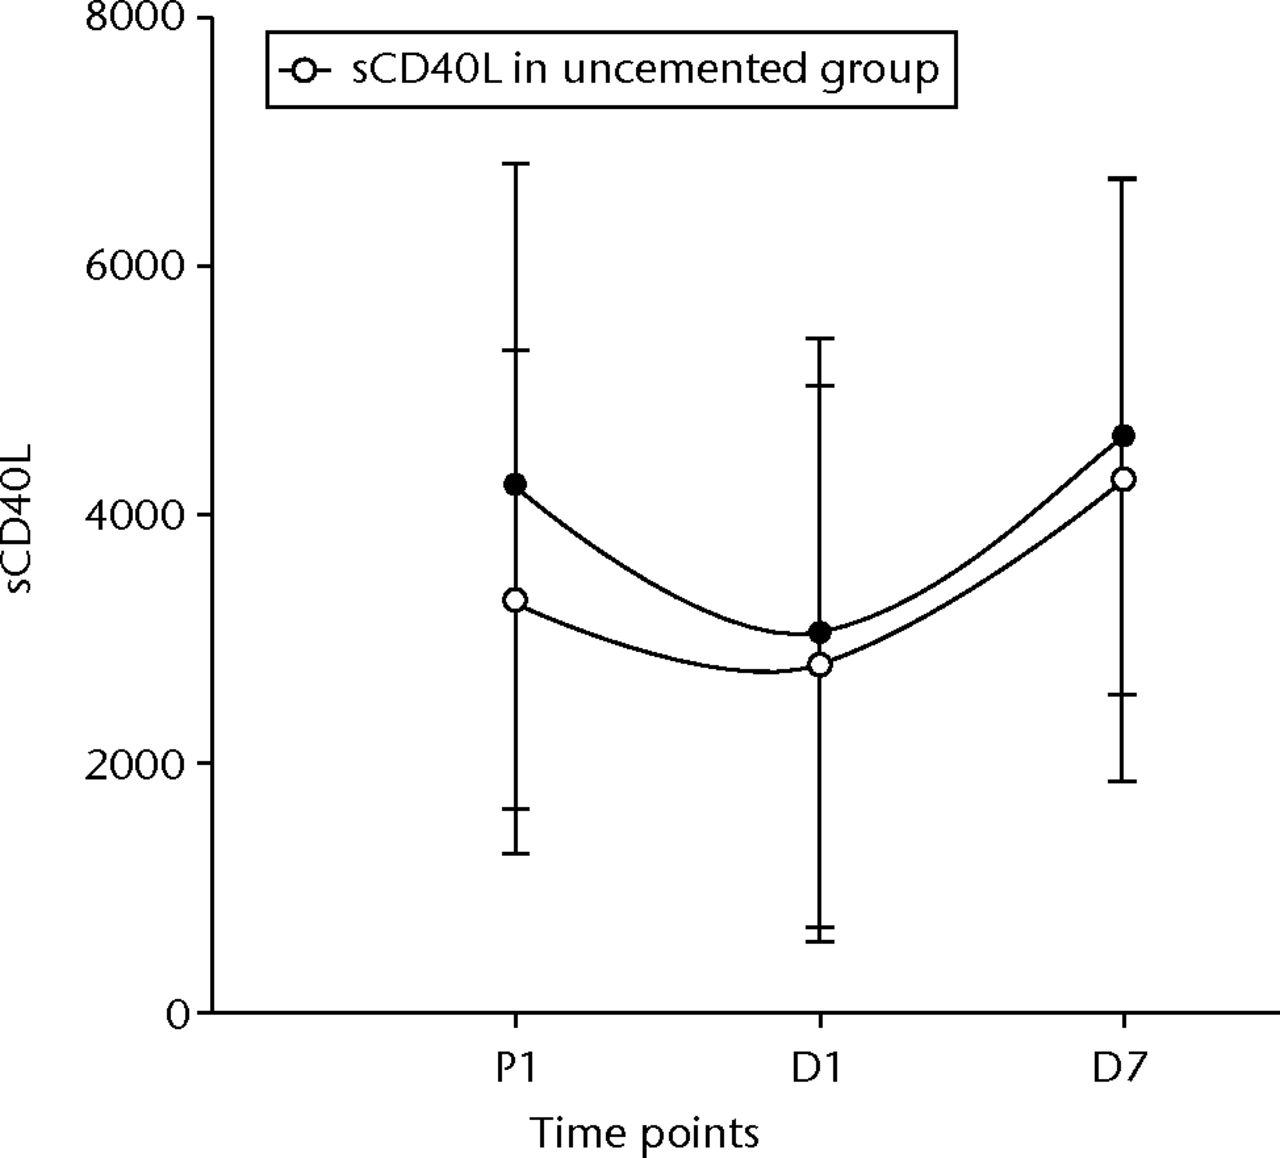 Fig. 5 
            Graph of changes in soluble CD40 ligand
levels (sCD4OL) (pg/ml) over the three time points (mean and standard
deviation) in the cemented total knee replacement (TKR) group (n
= 19) against the uncemented TKR group (n = 19)
          